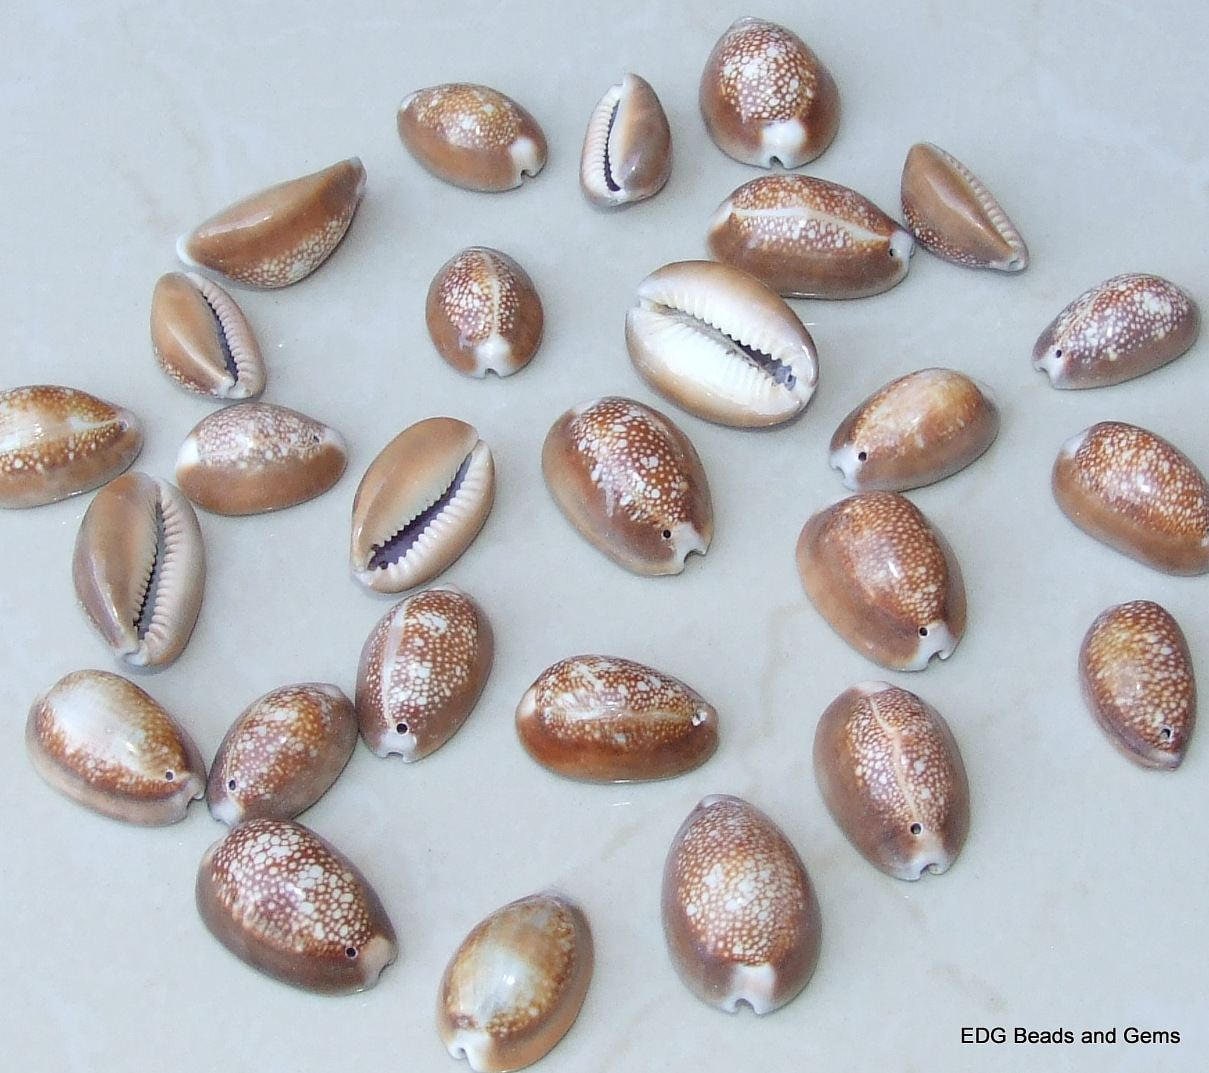 5 Large Cowrie Shell, Natural Sea Shell, Money Shell Bead, Ocean Seashell, Bulk Shell, Beach, Seashell - 25mm to 35mm - 5 Shells - 007